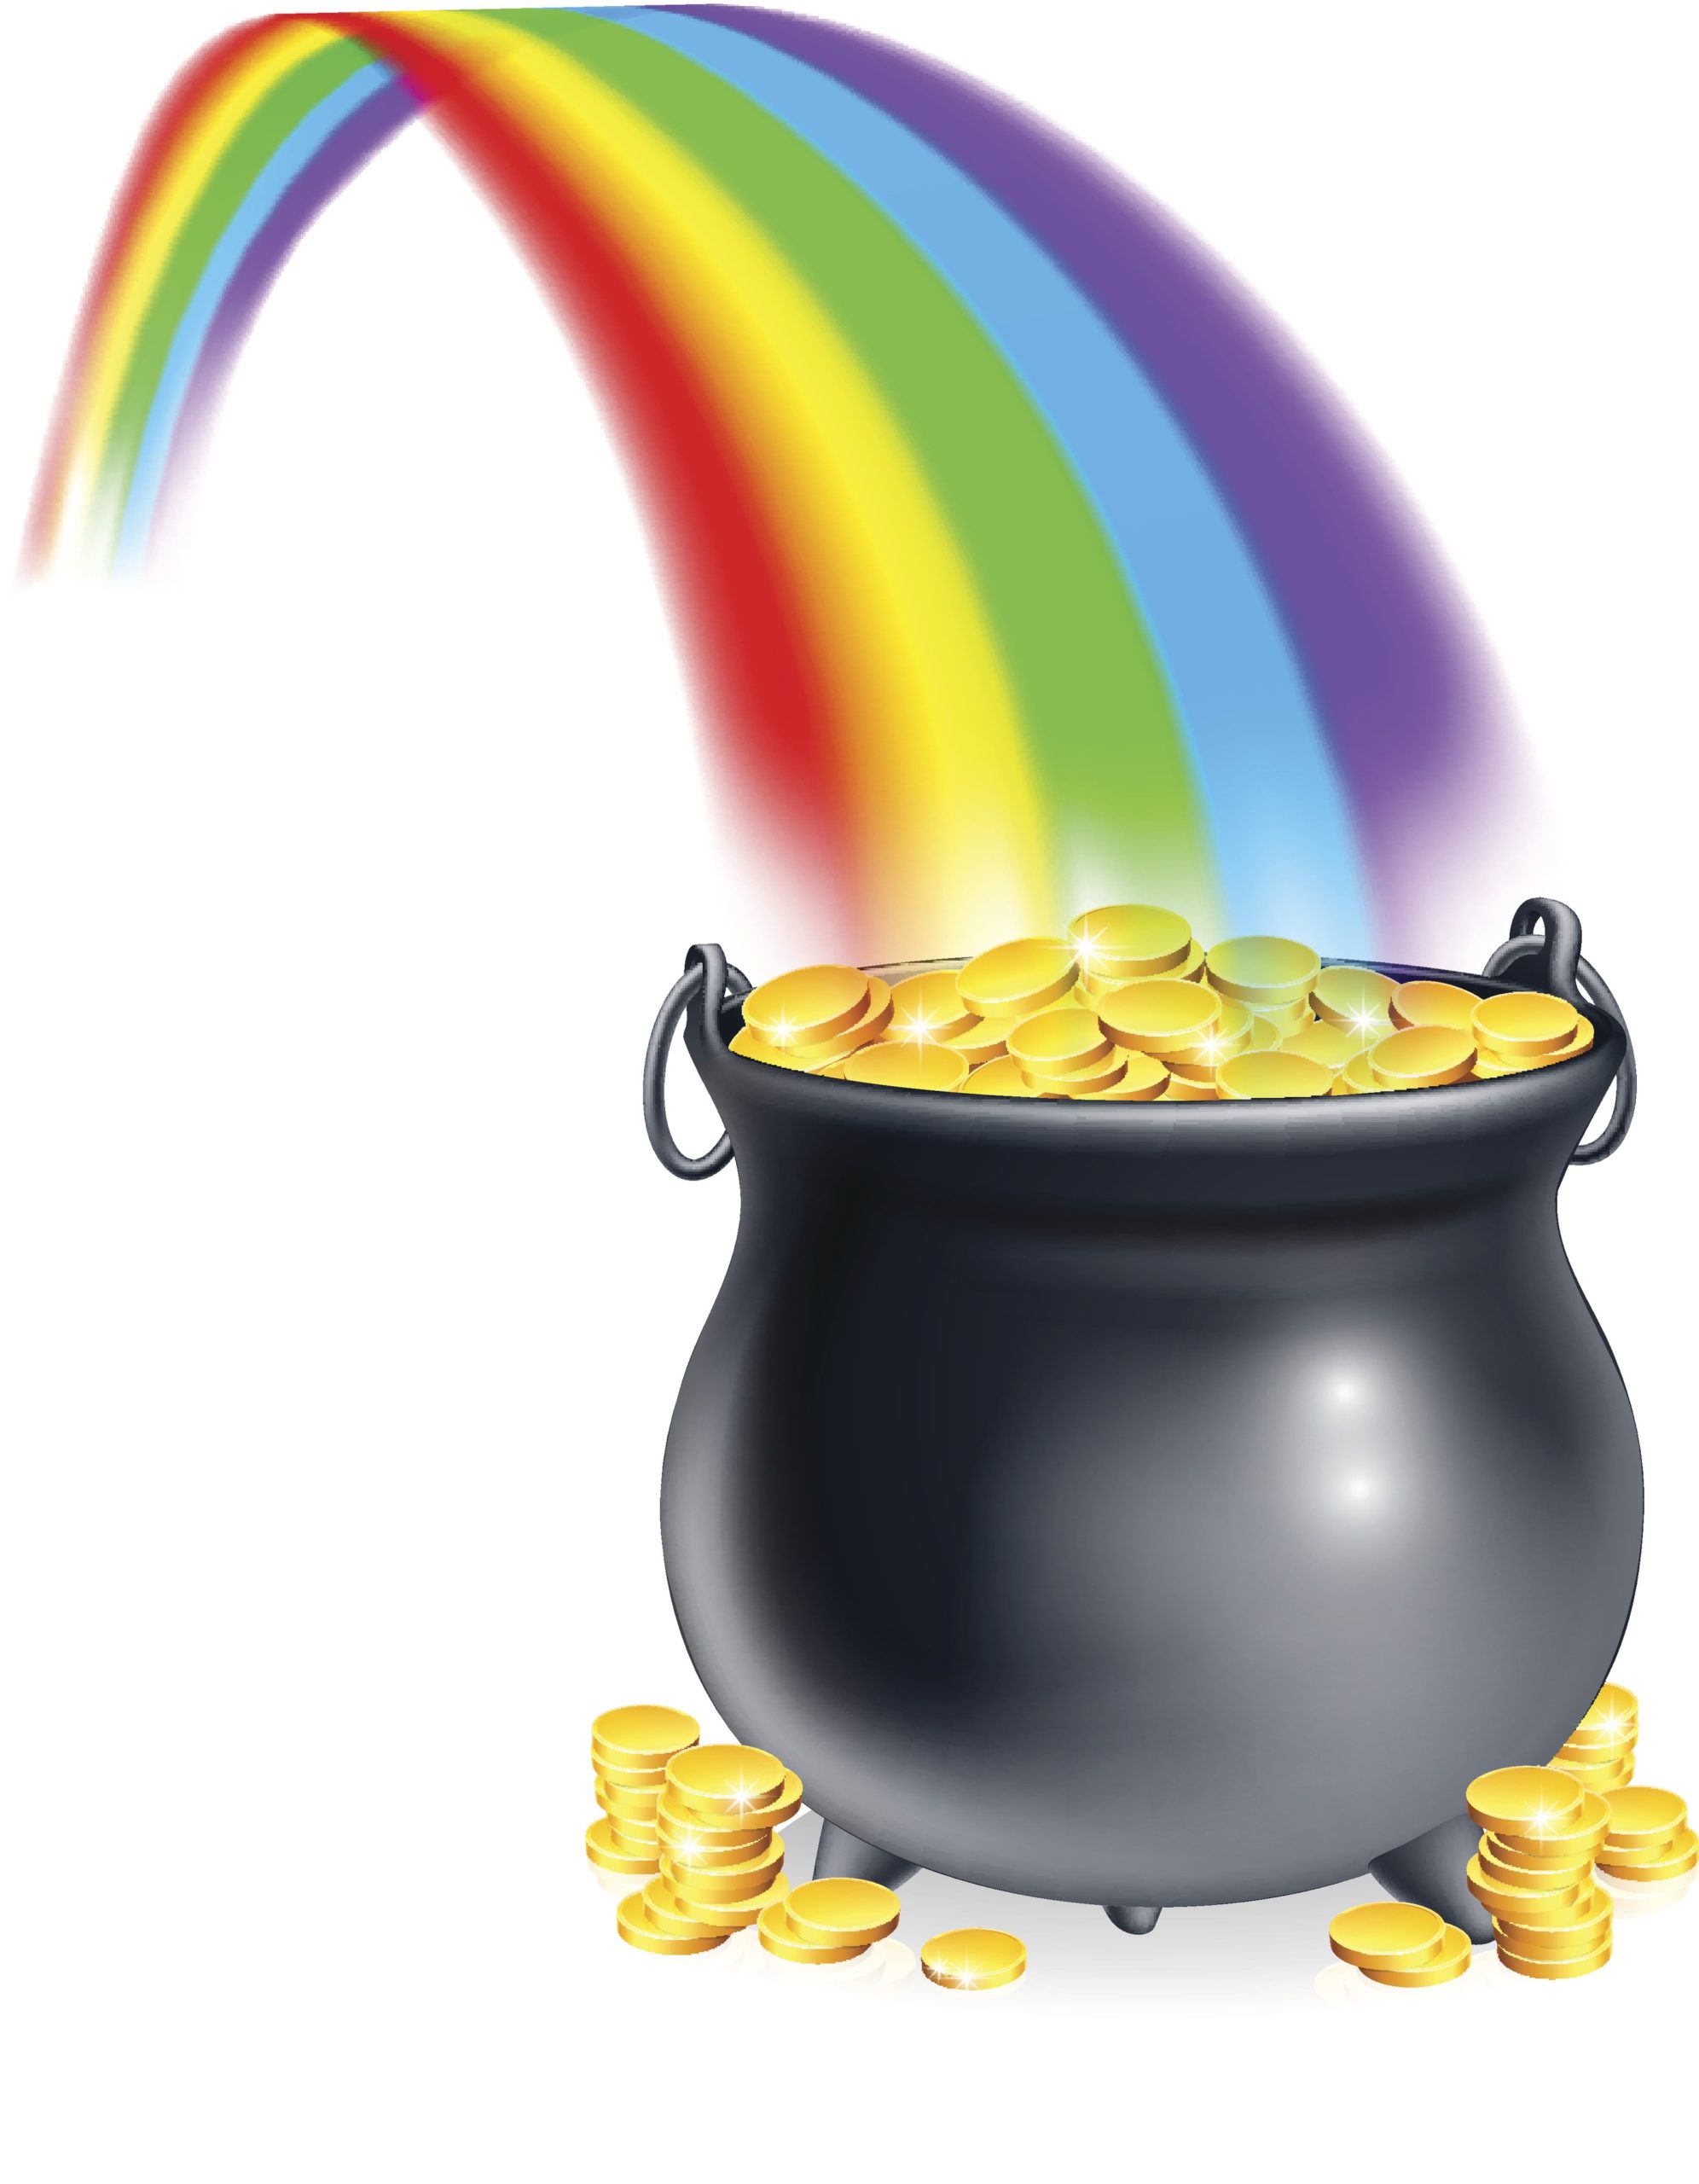 Pot of gold at end of rainbow